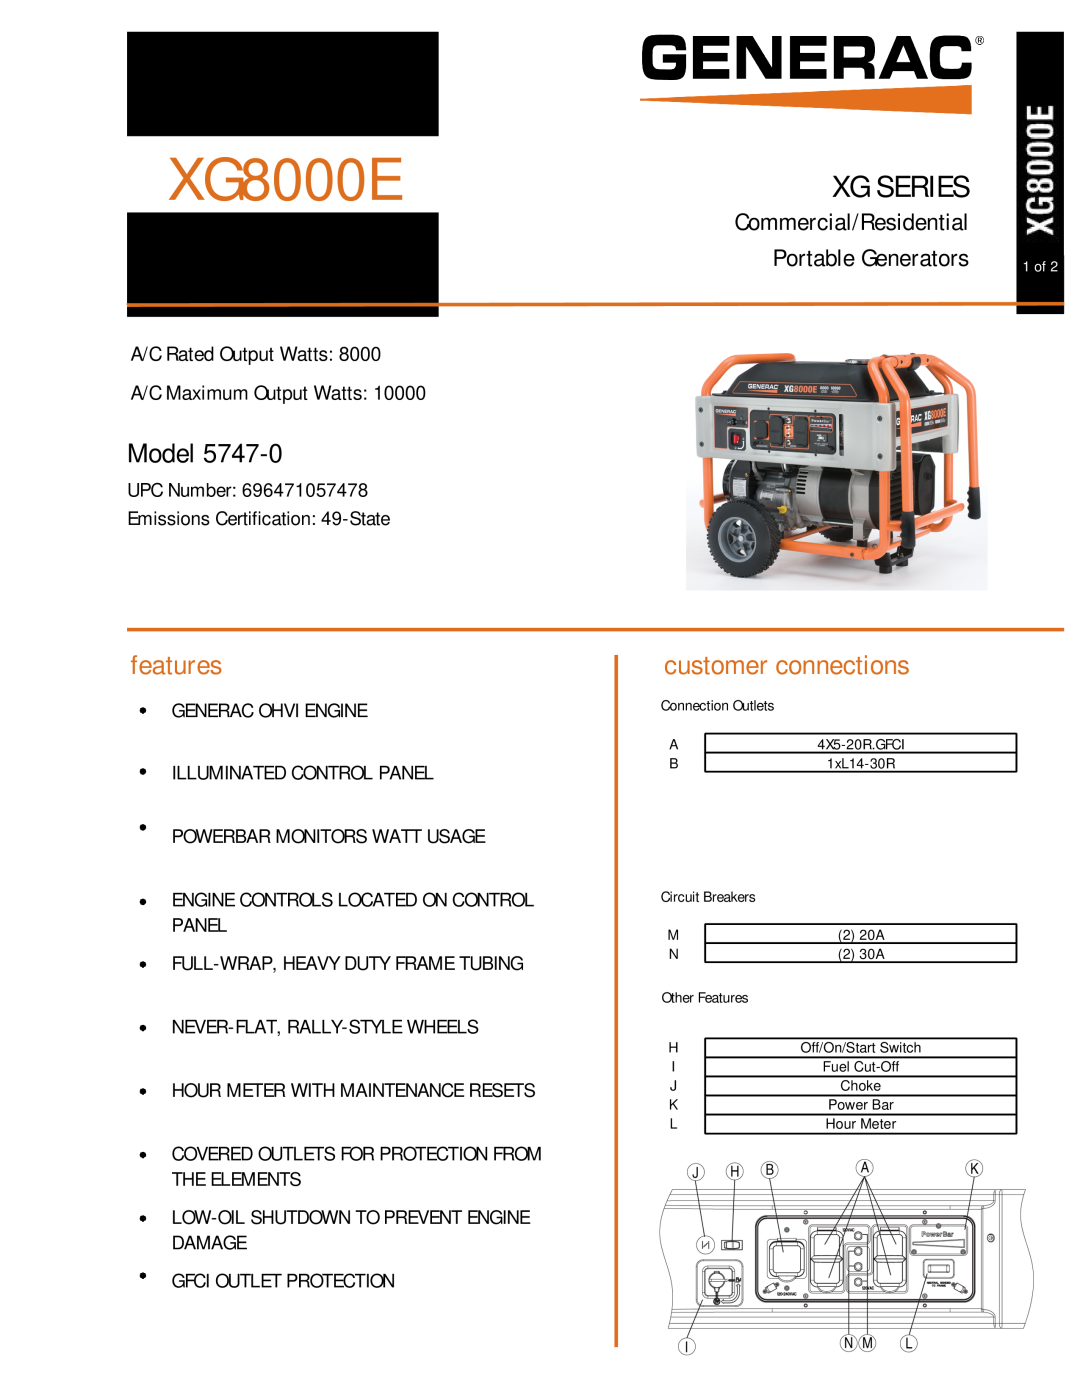 Generac Power Systems 5747-0 manual Model, XG8000E, features, customer connections, Xg Series 